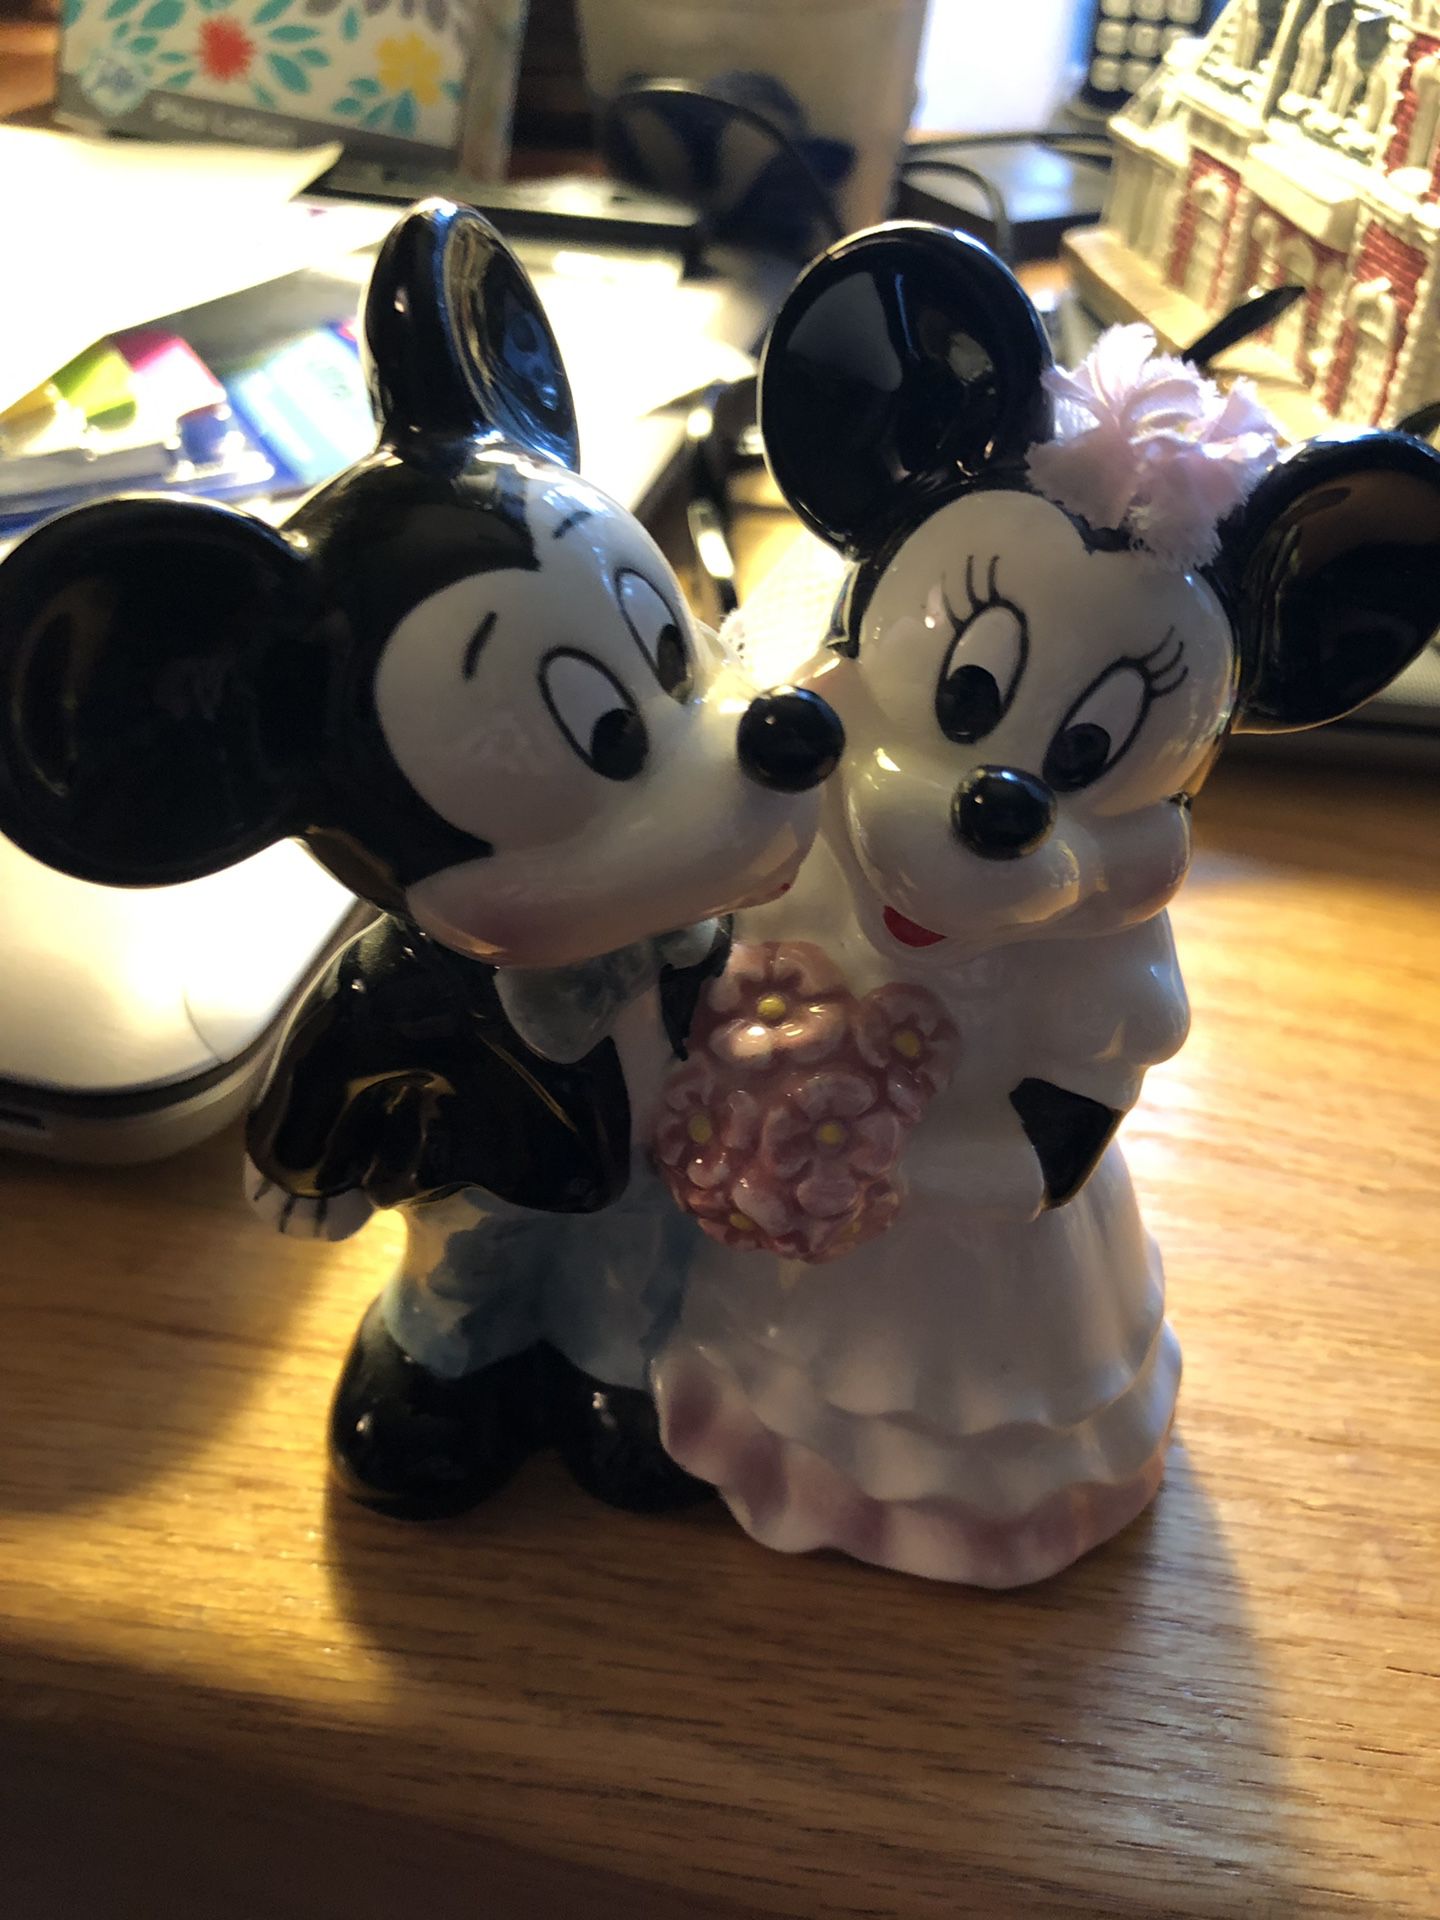 Bride and groom Mickey and Minnie